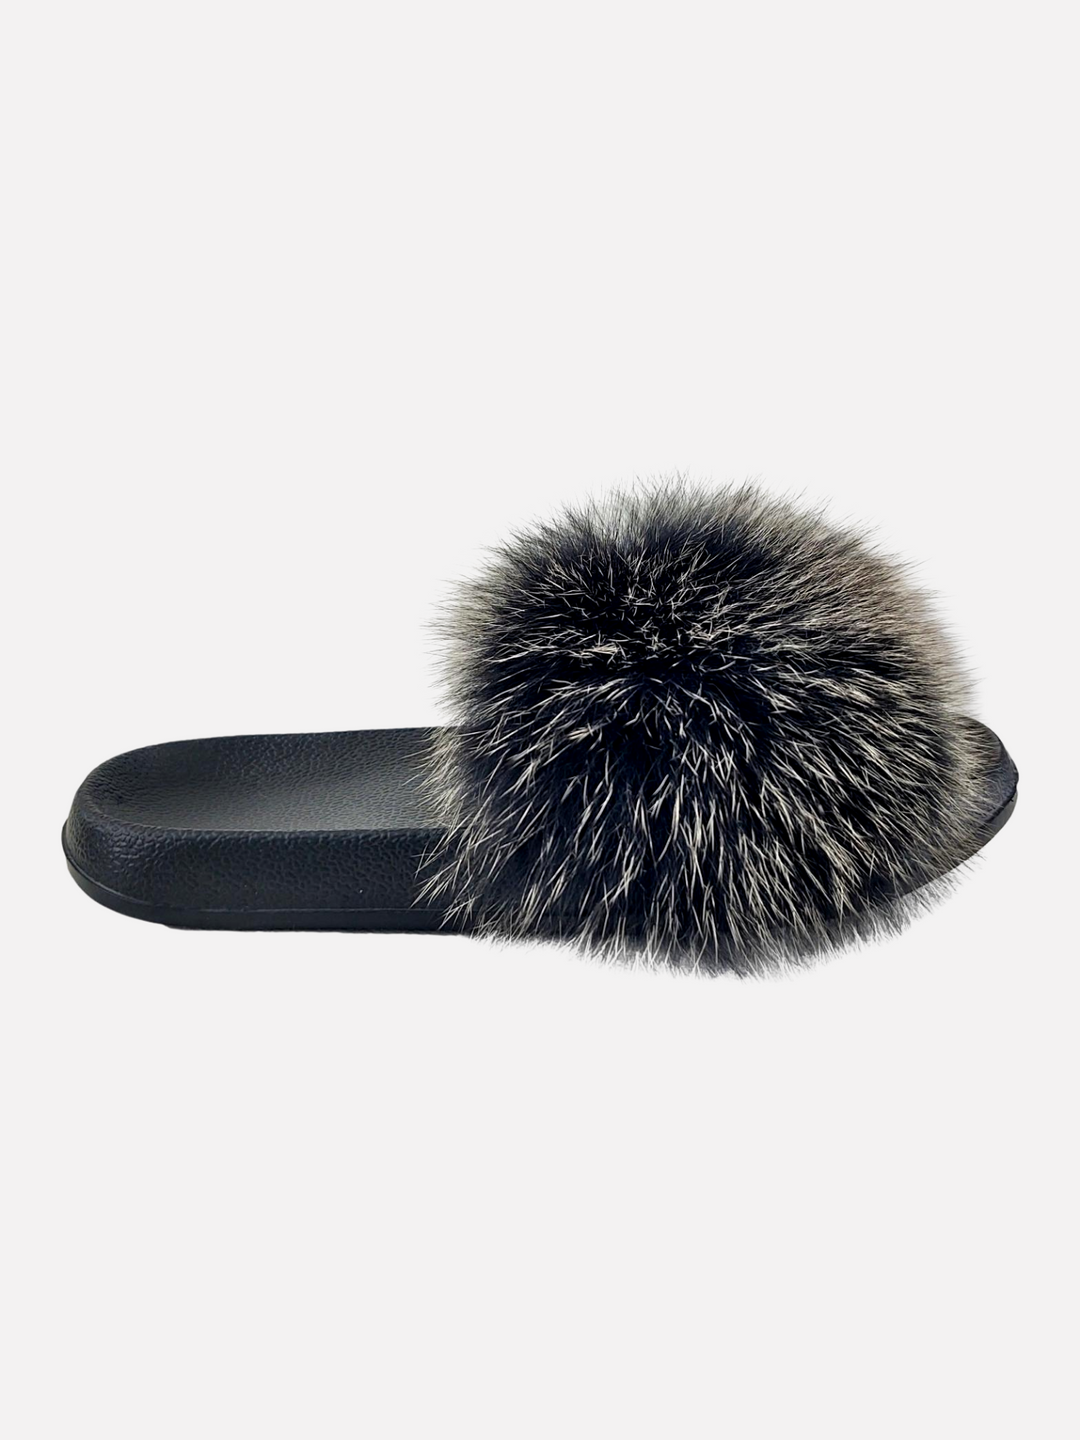 Fox Slippers 2021 - Silver Fox - Accesories - Nature